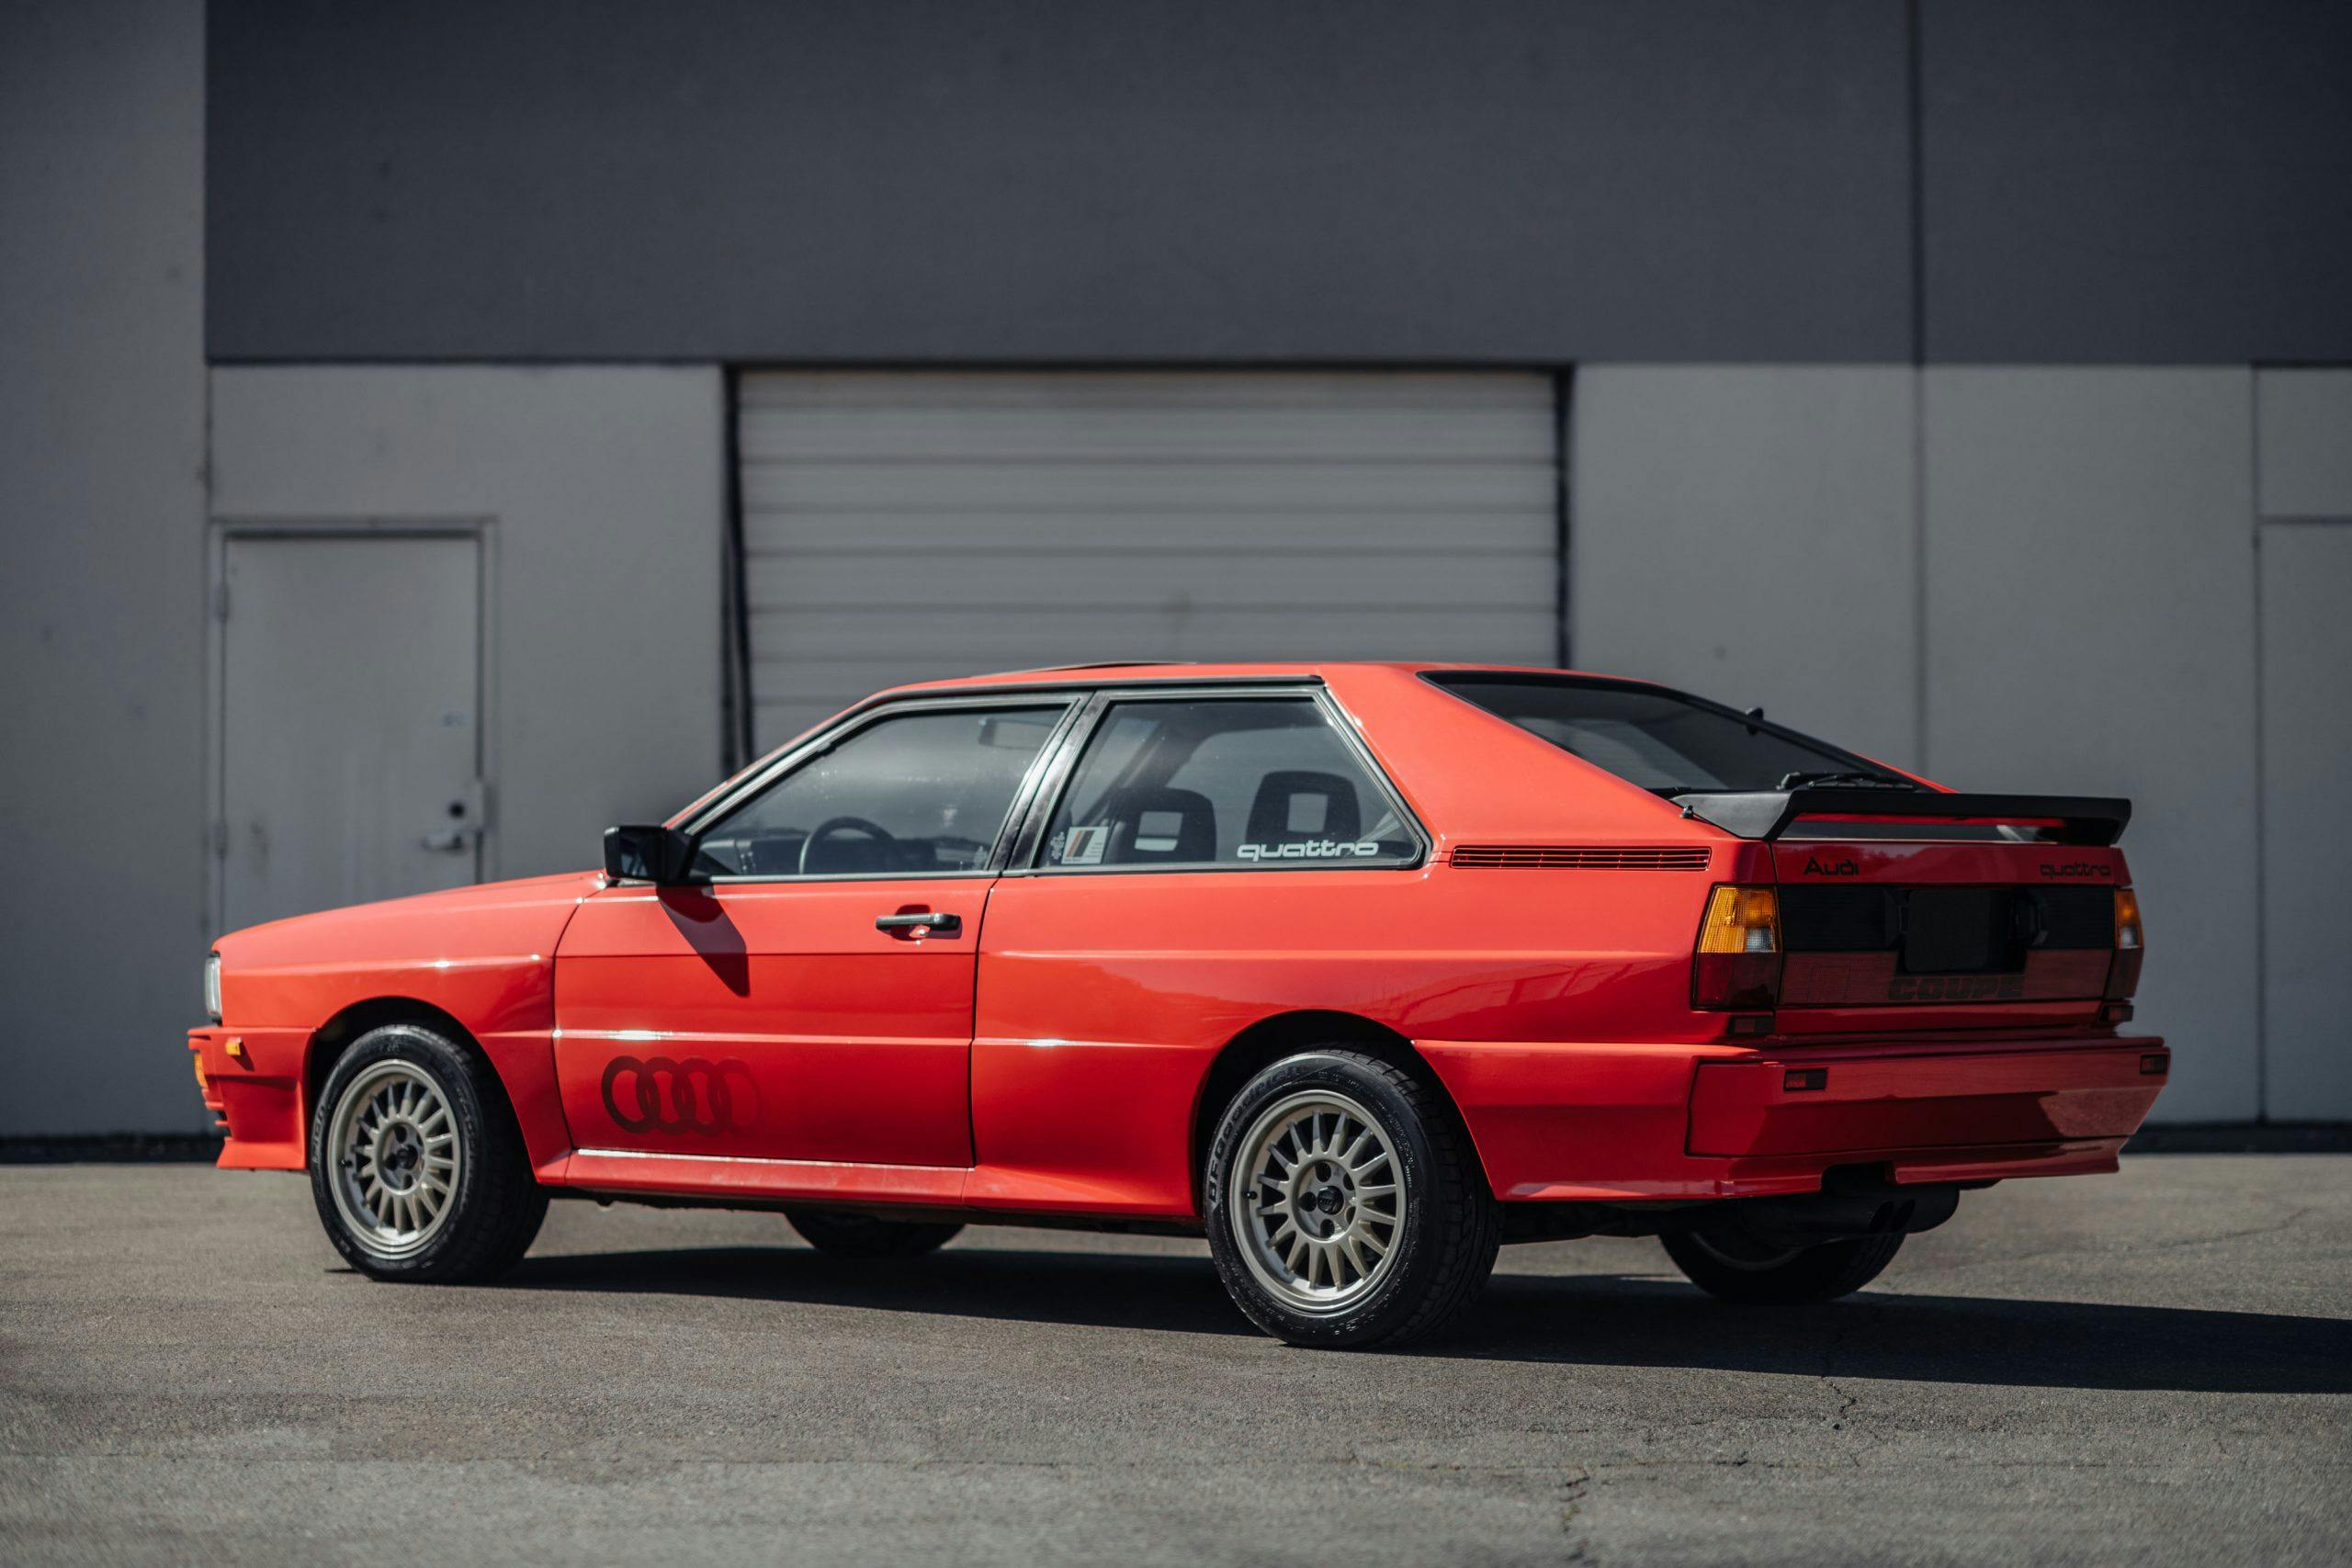 Audi's Ur-Quattro, trend-setter on the rally stage and street, is fast  becoming a blue-chip '80s classic - Hagerty Media